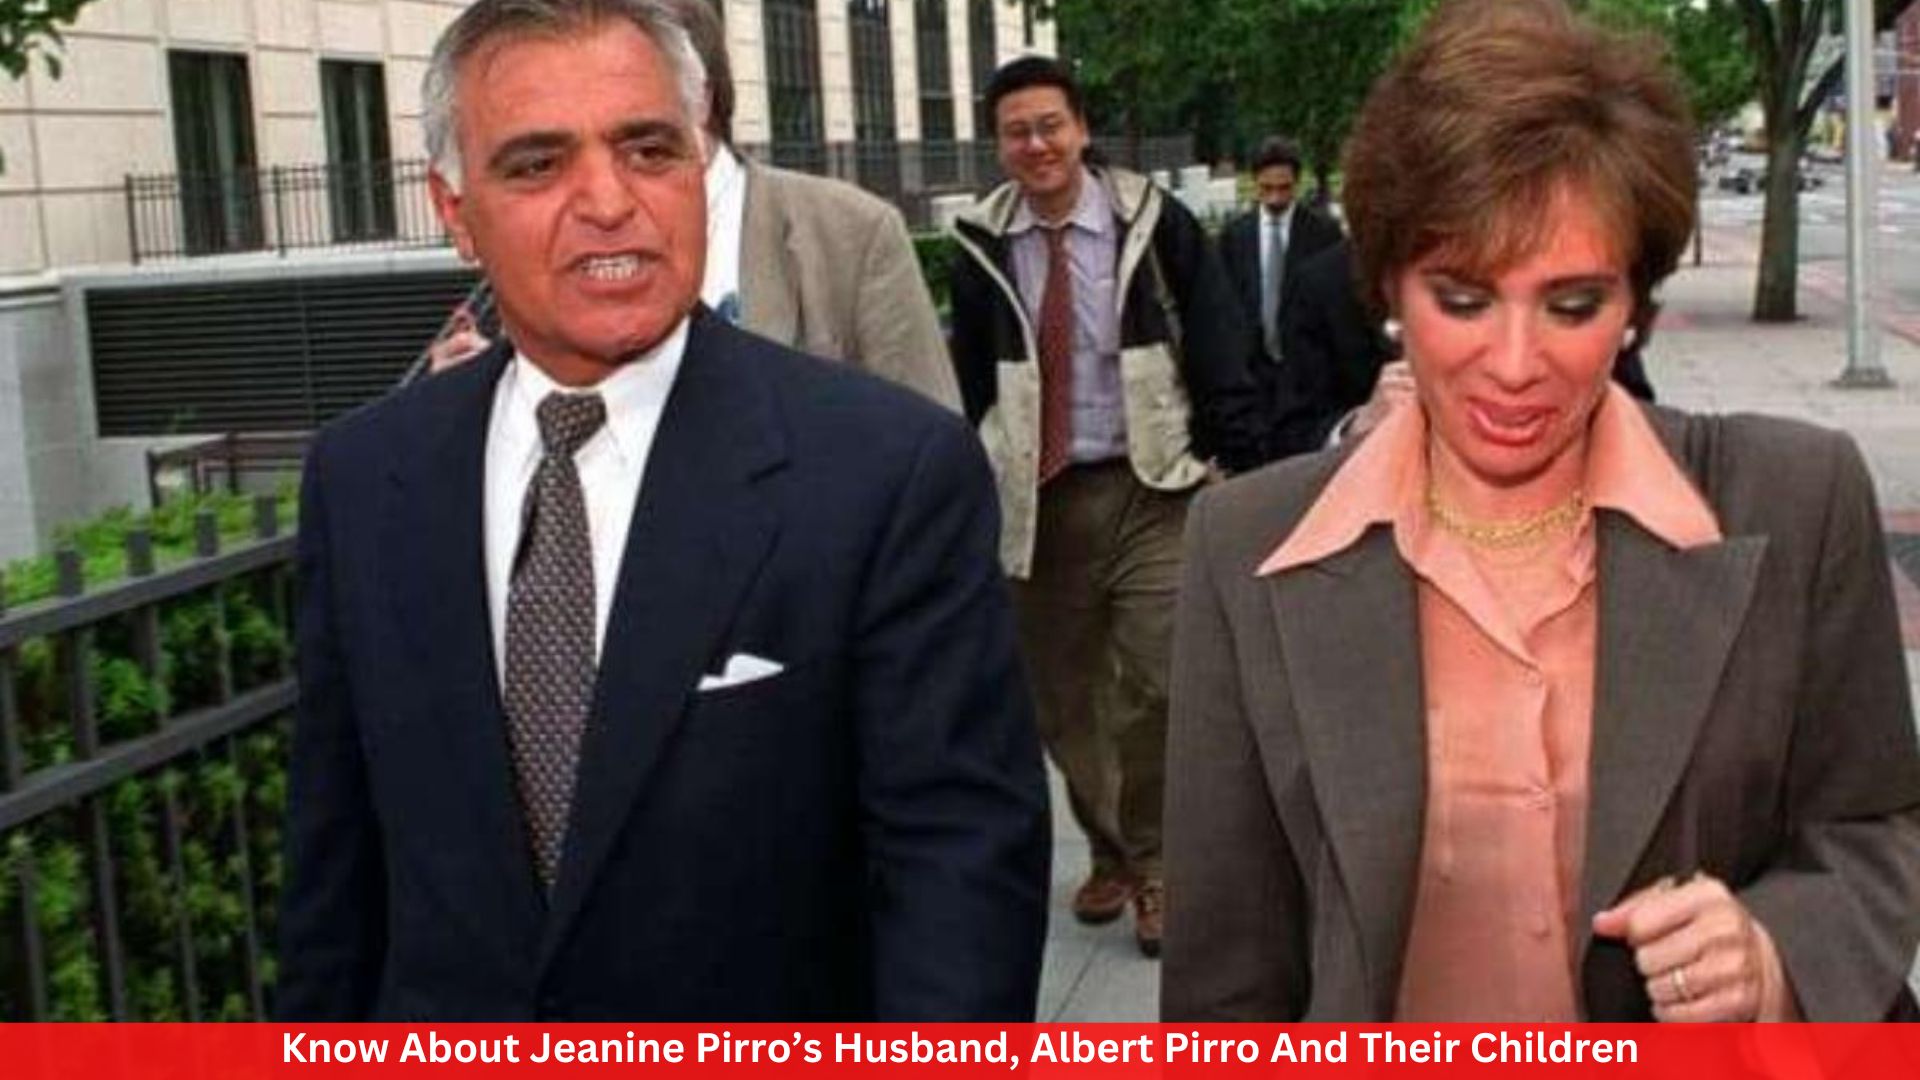 Know About Jeanine Pirro’s Husband, Albert Pirro And Their Children